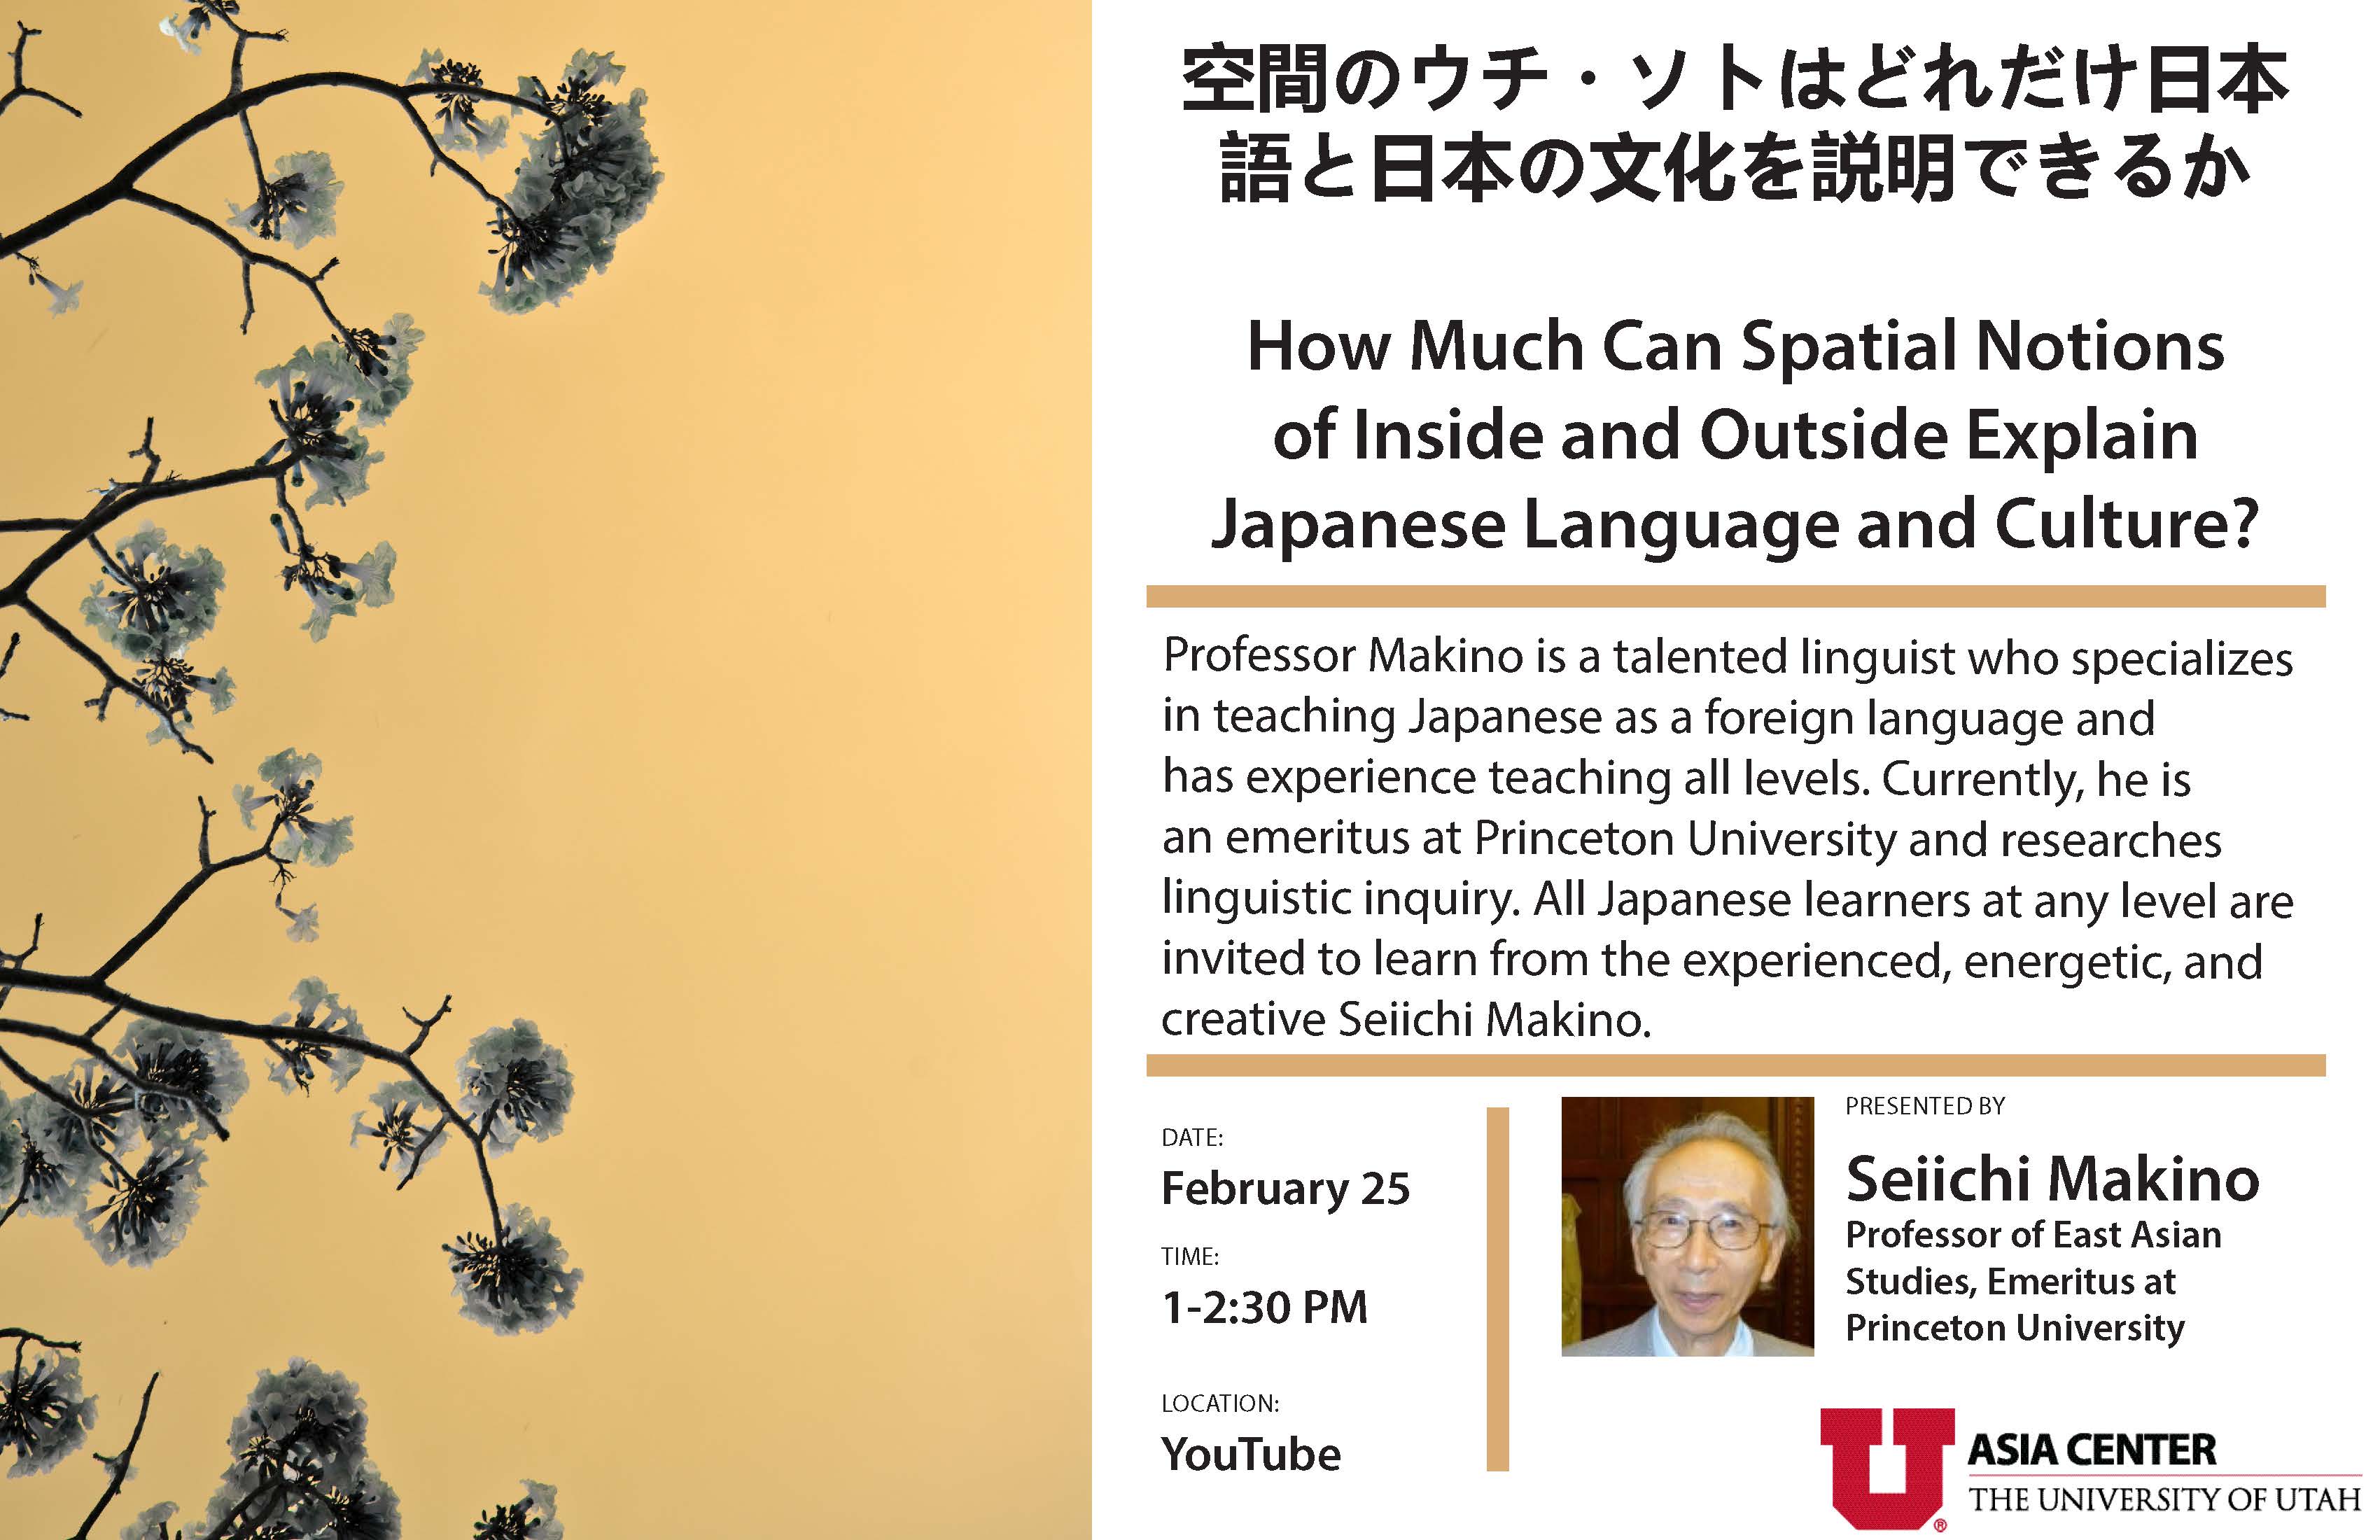 How Much Can Spatial Notions of Inside and Outside Explain Japanese Language and Culture?